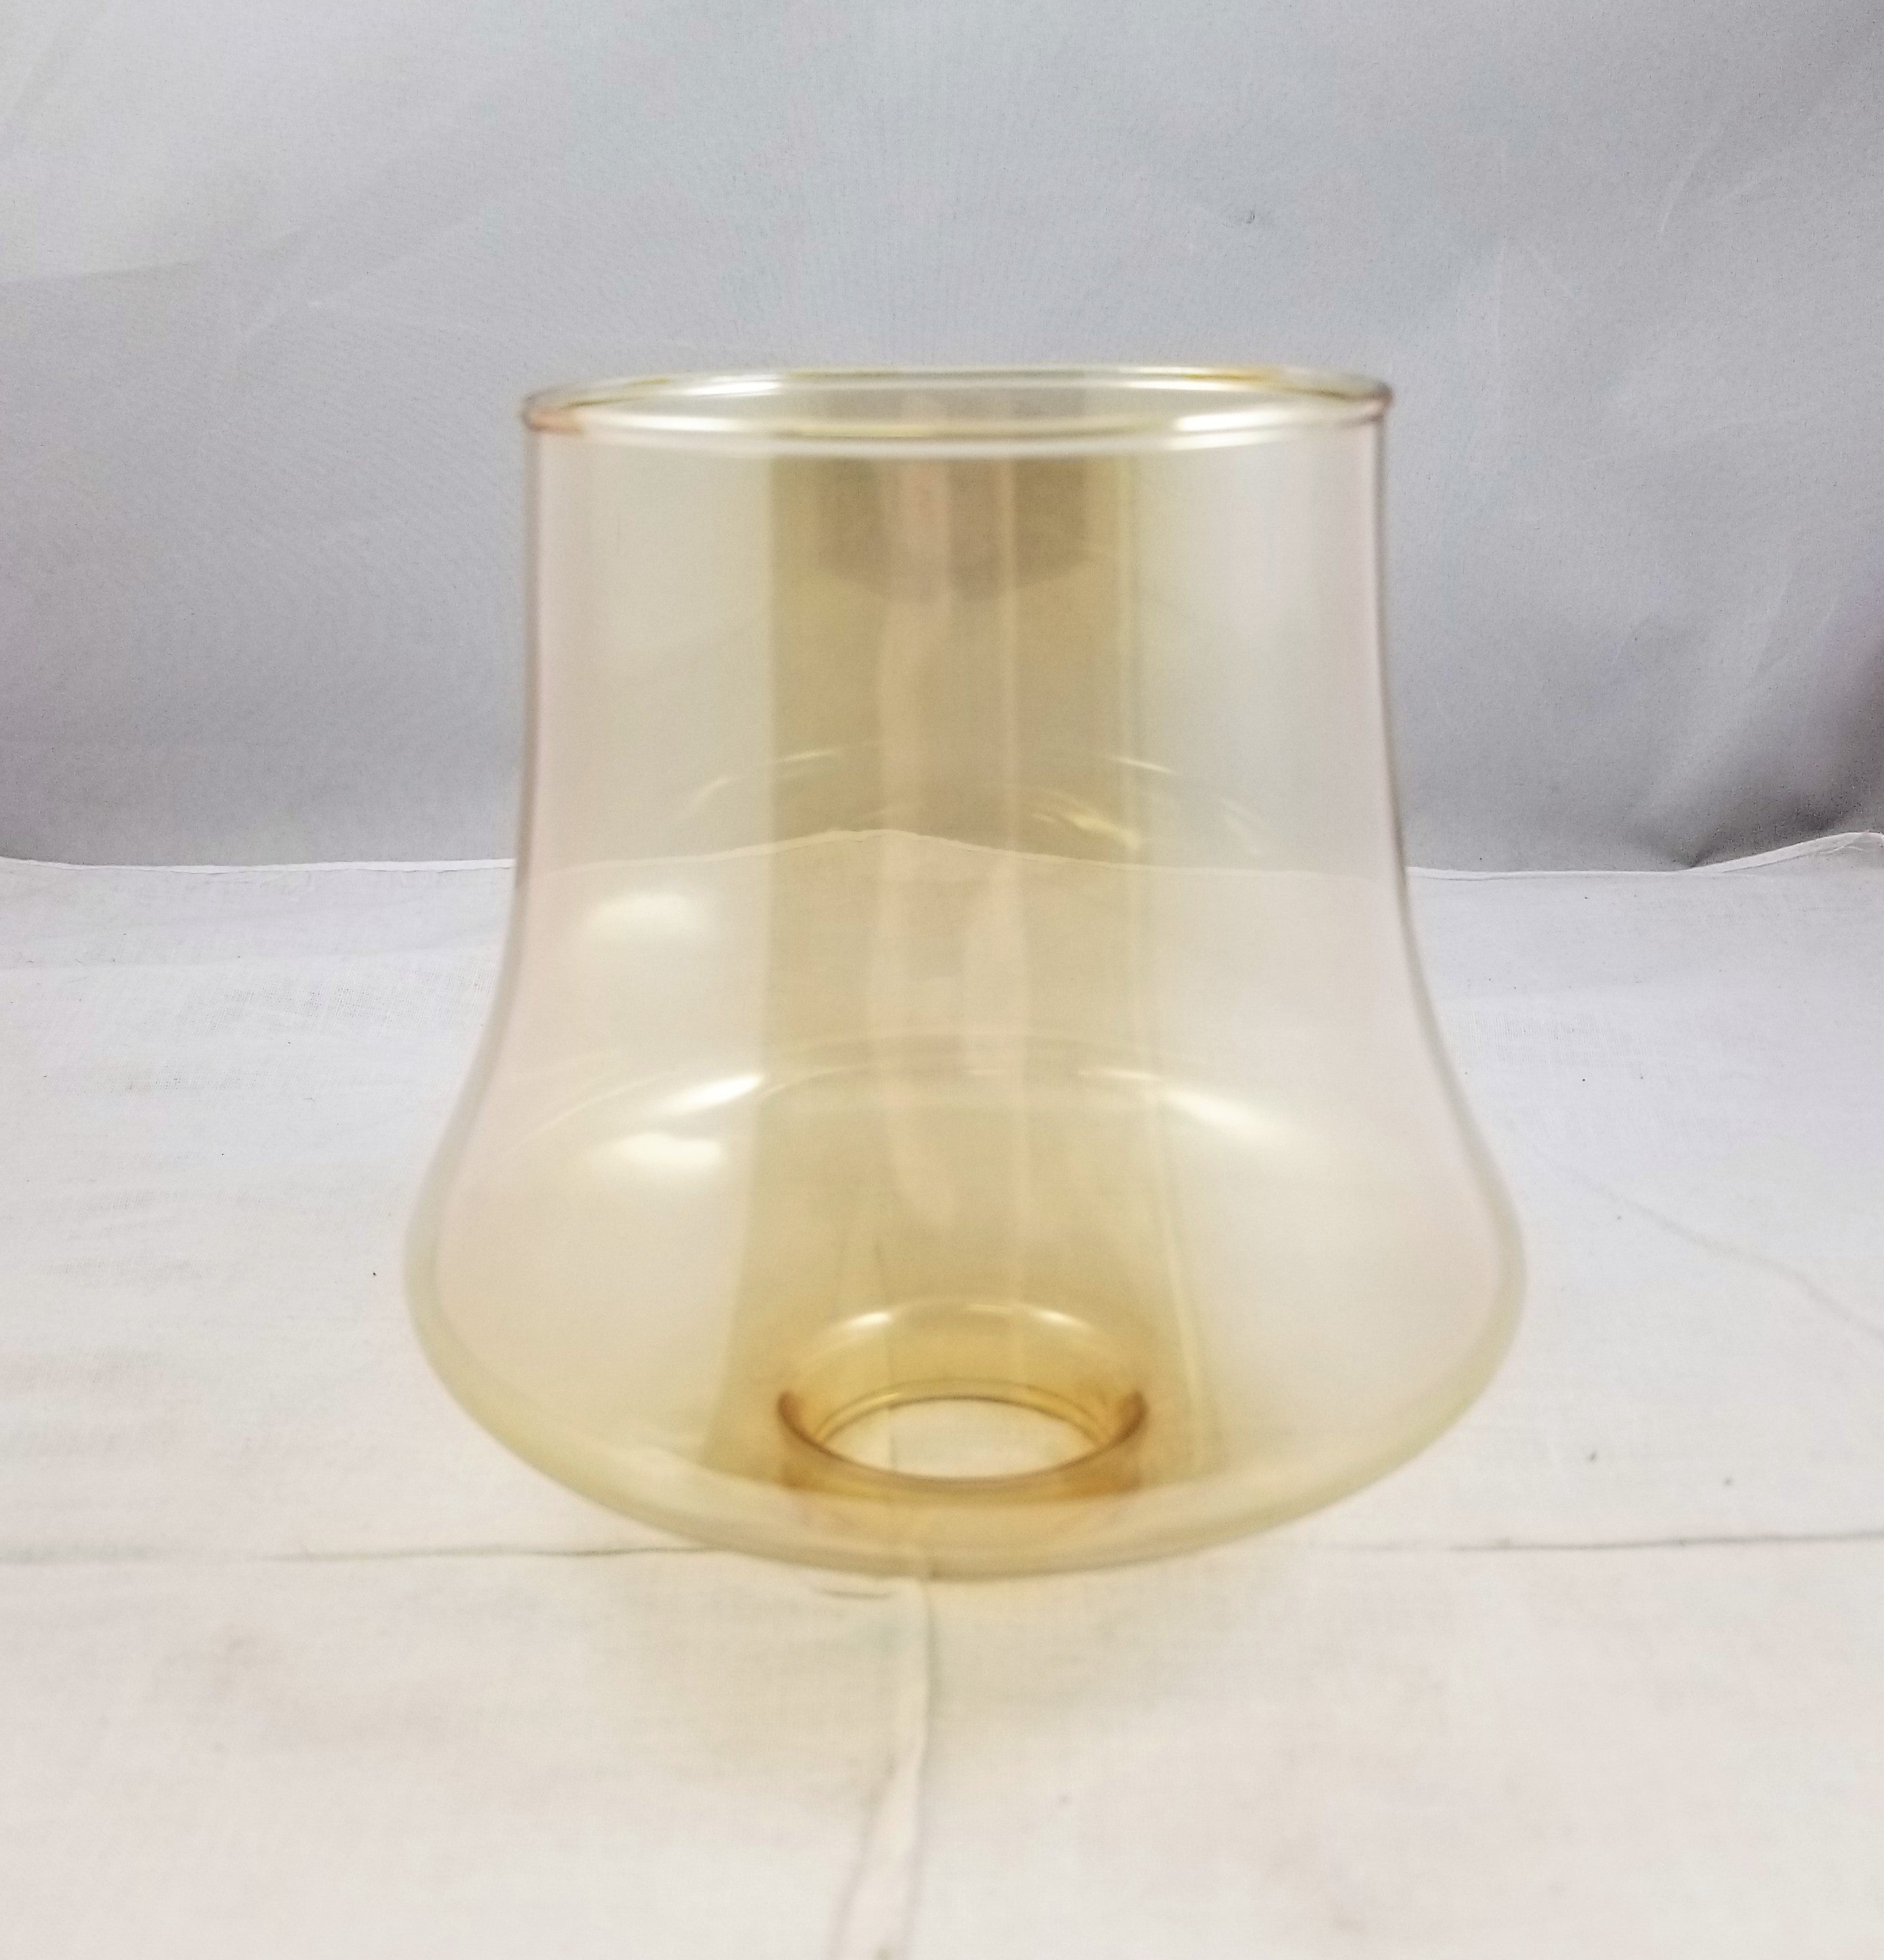 1-5/8" fitter Amber Glass Shade 5" high **OUT OF STOCK**